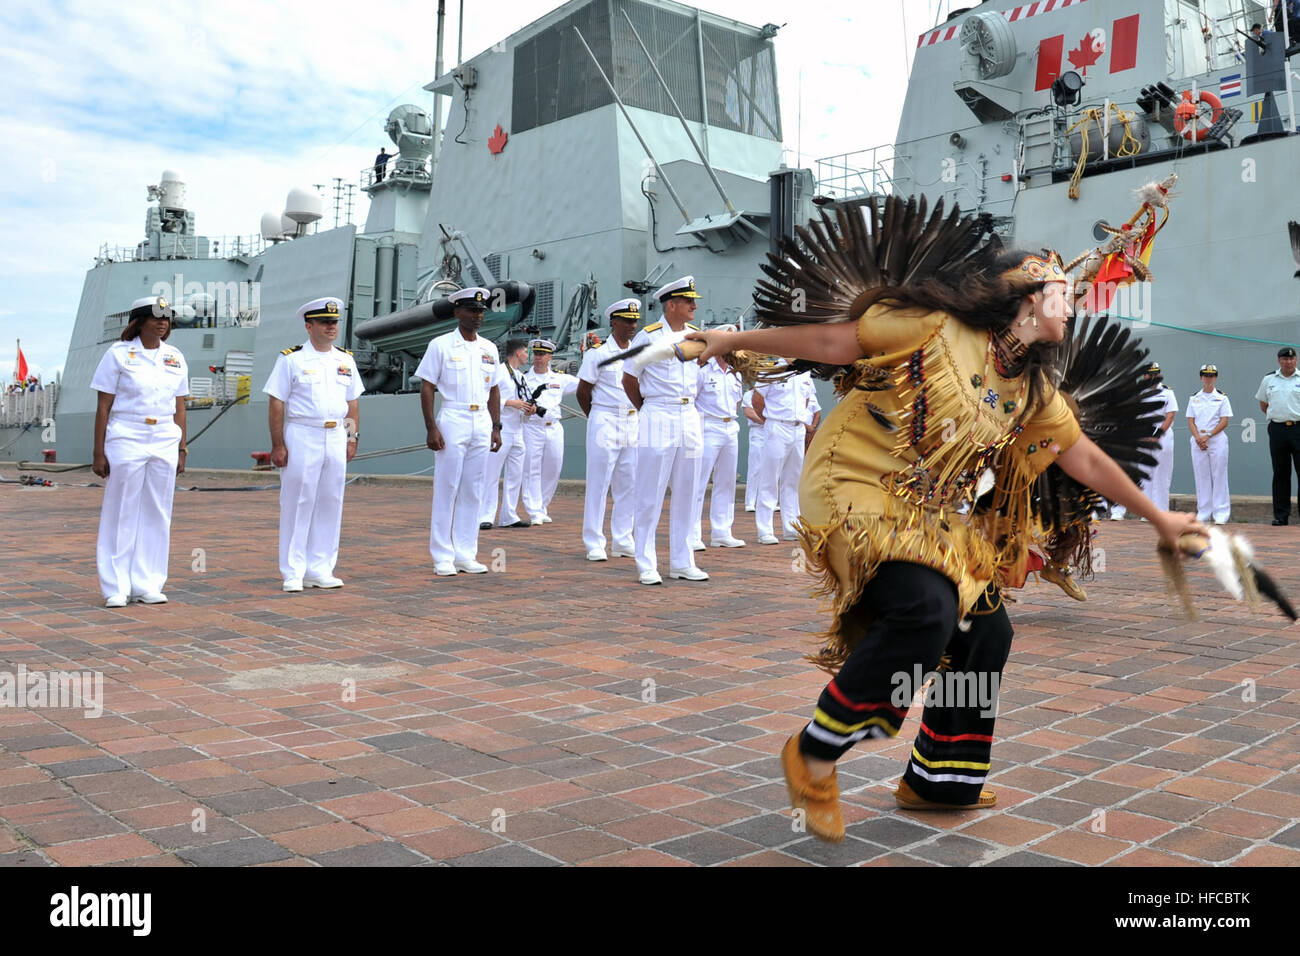 120726-N-YZ751-113 QUEBEC CITY (July 26, 2012) Melenie Savard, a member of the Wendake First Nation, performs a traditional dance for Rear Adm. Gregory M. Nosal, commander of Carrier Strike Group (CSG) 2, and American and Canadian sailors during a welcoming ceremony in front of the Canadian Halifax-class frigate HMCS Ville de Quebec (FFH 332). Ville de Quebec, the Oliver Hazard Perry-class frigate USS DeWert (FFG 45), and the Cyclone-class coastal patrol ship USS Hurricane (PC 3) are visiting cities in America and Canada to celebrate the Bicentennial of the War of 1812. (U.S. Navy photo by Mas Stock Photo